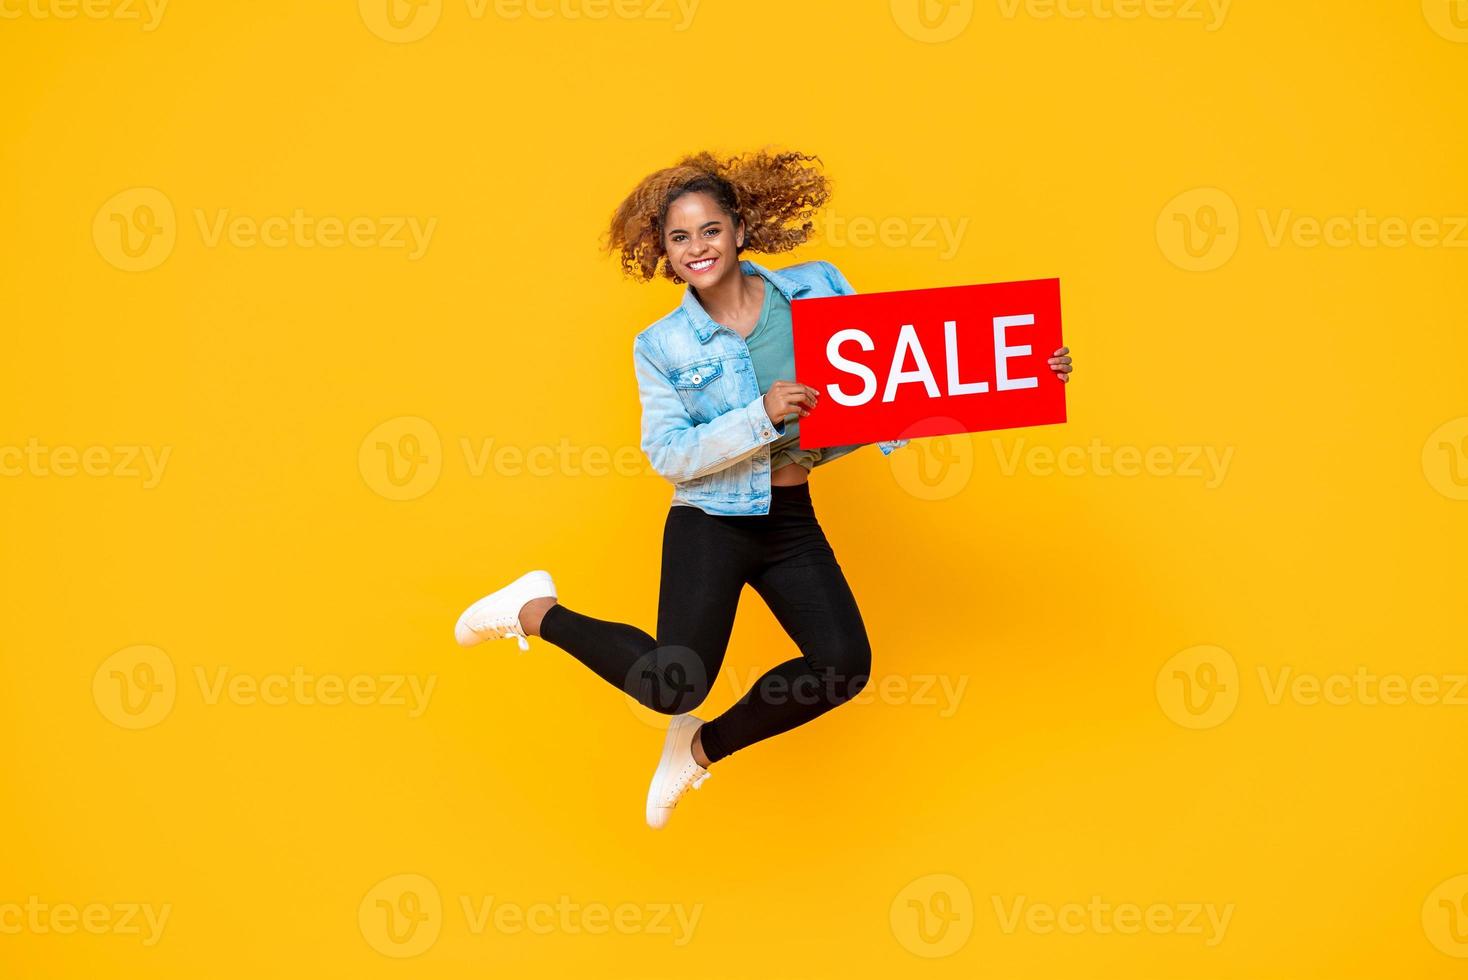 Surprised smiling woman jumping with red sale promotion sign isolated on yellow background photo